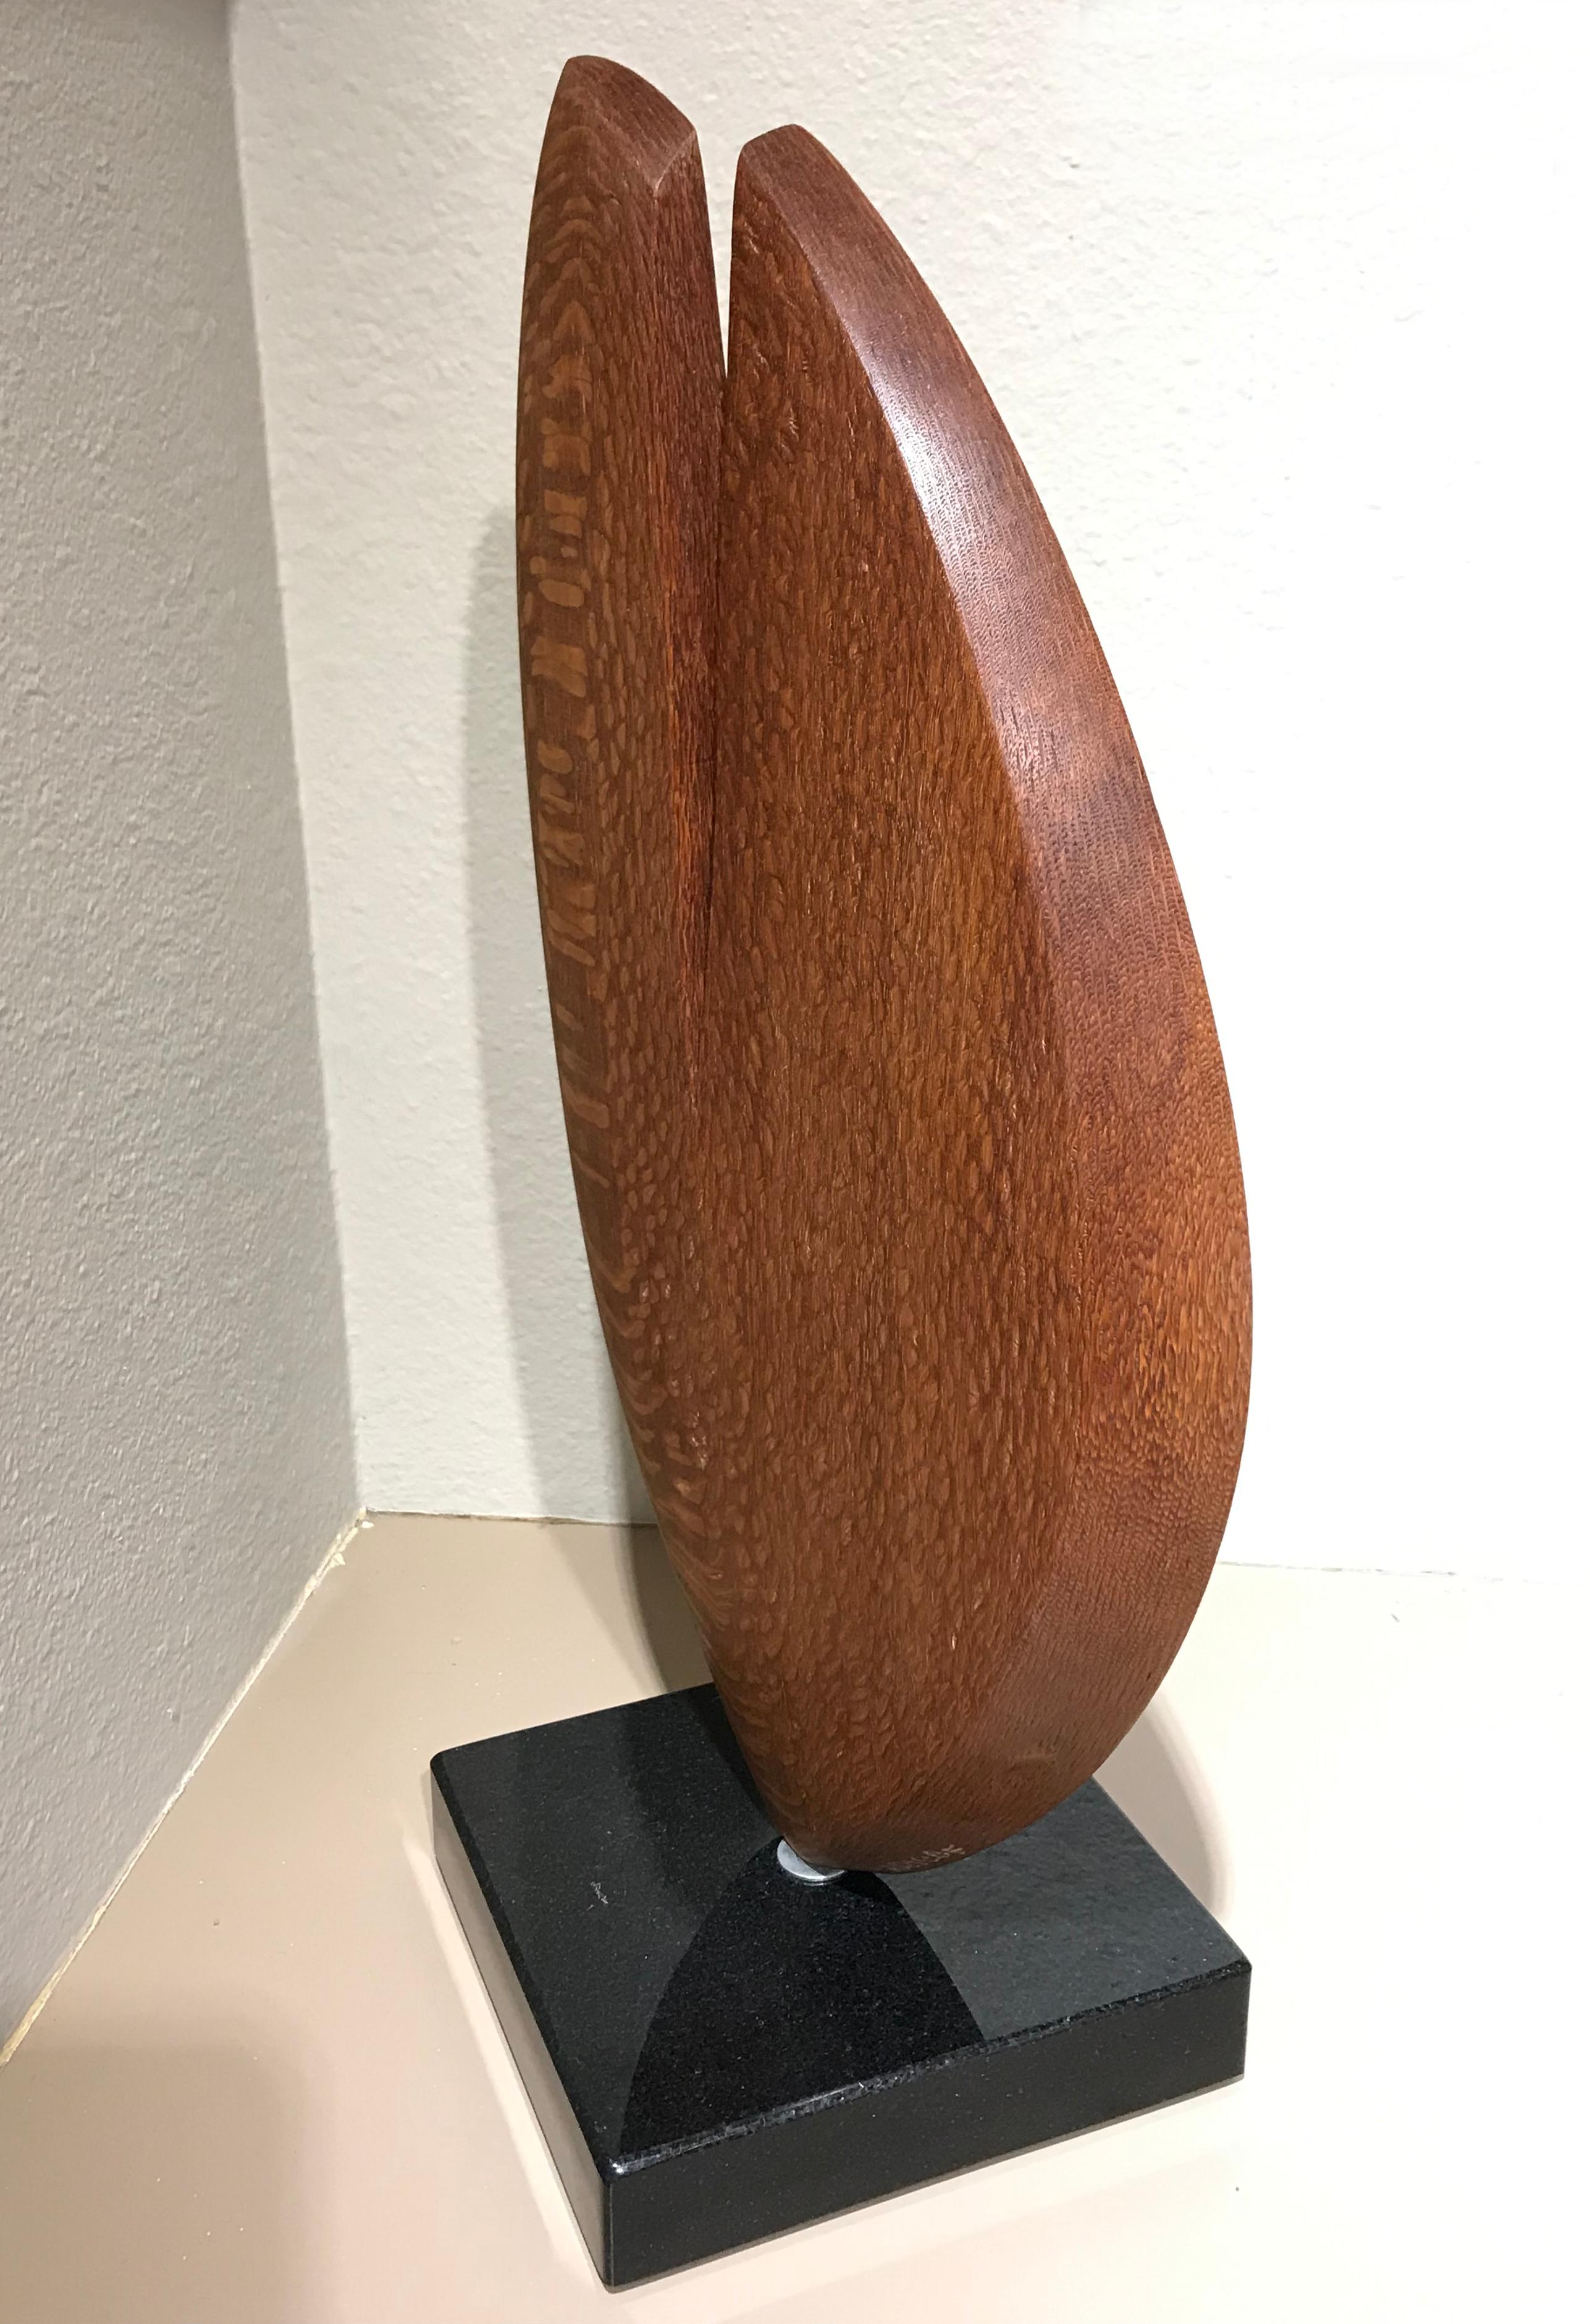 Push / Pull by Kathleen Caricof
One-of-a-Kind abstract sculpture 
LaceWood

​“I design for a purpose, combining emotion and intention to grow ideas; translating these concepts into vision, and vision into reality.” -Kathleen Caricof
 
Caricof’s